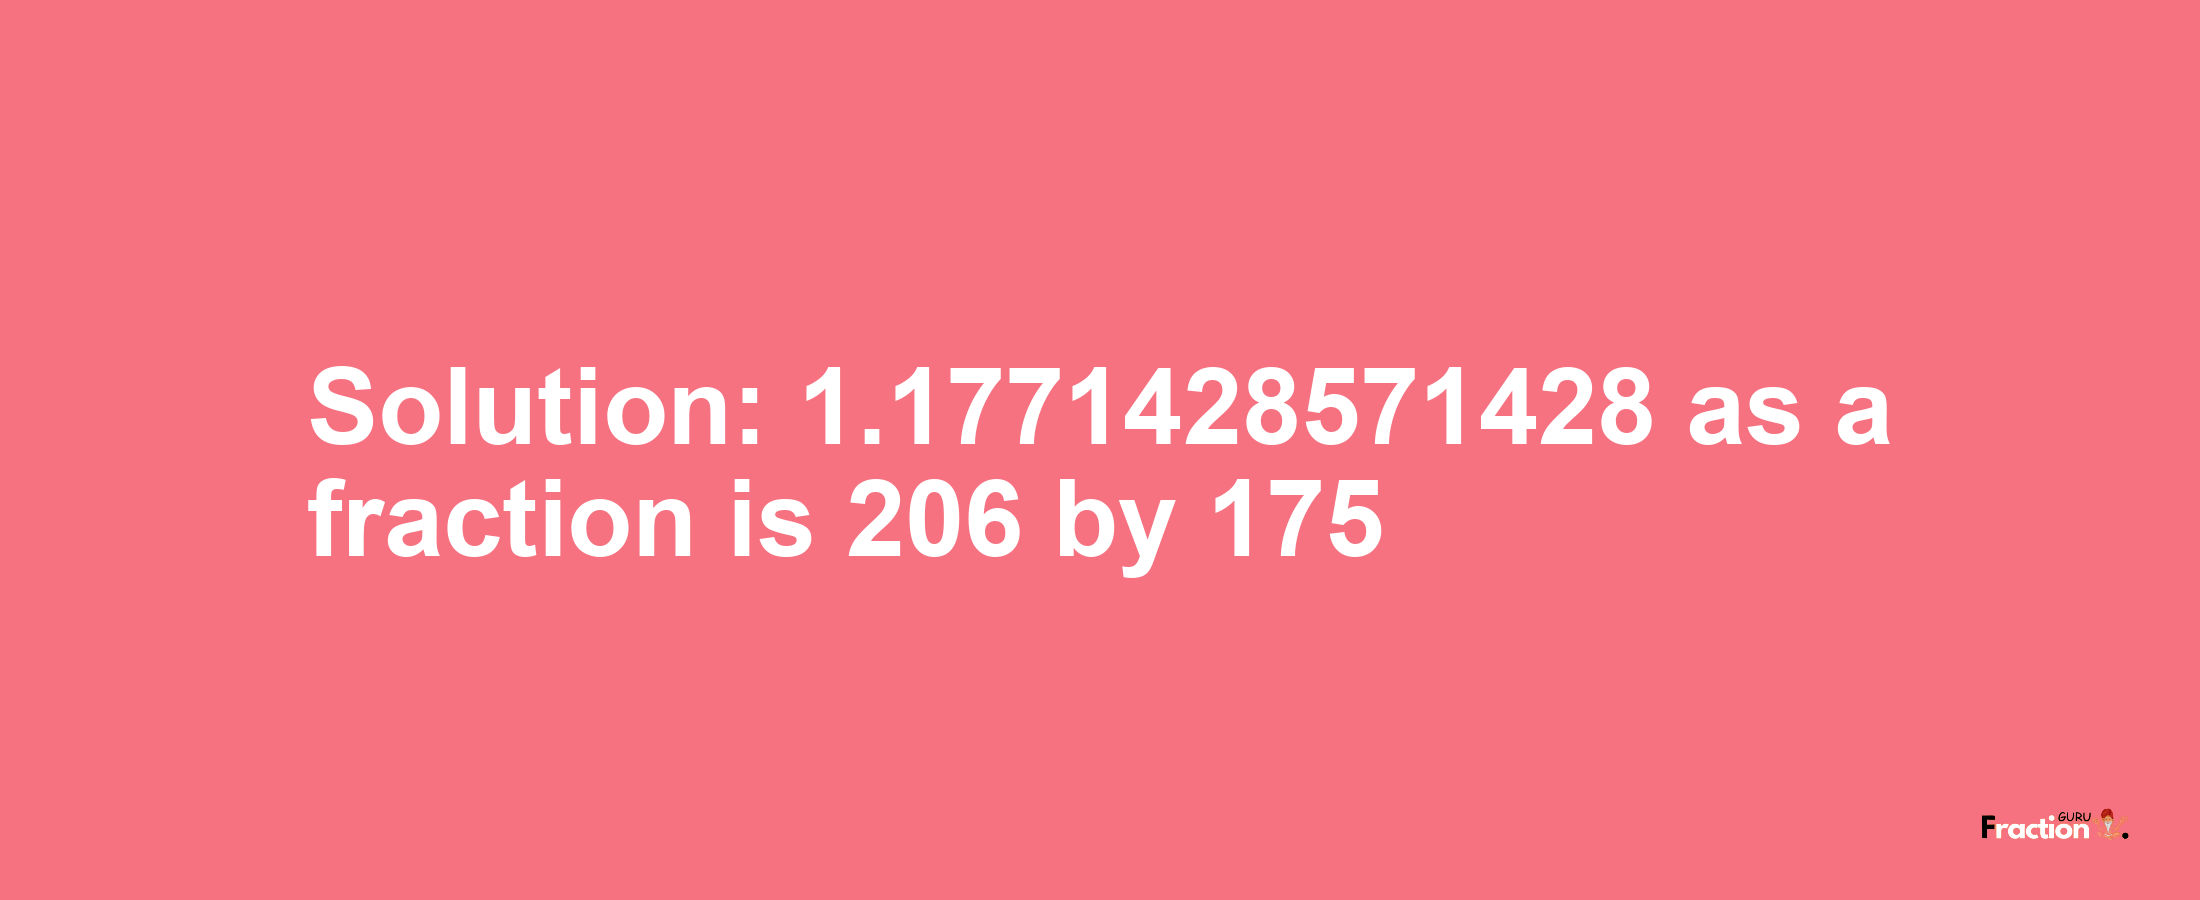 Solution:1.1771428571428 as a fraction is 206/175